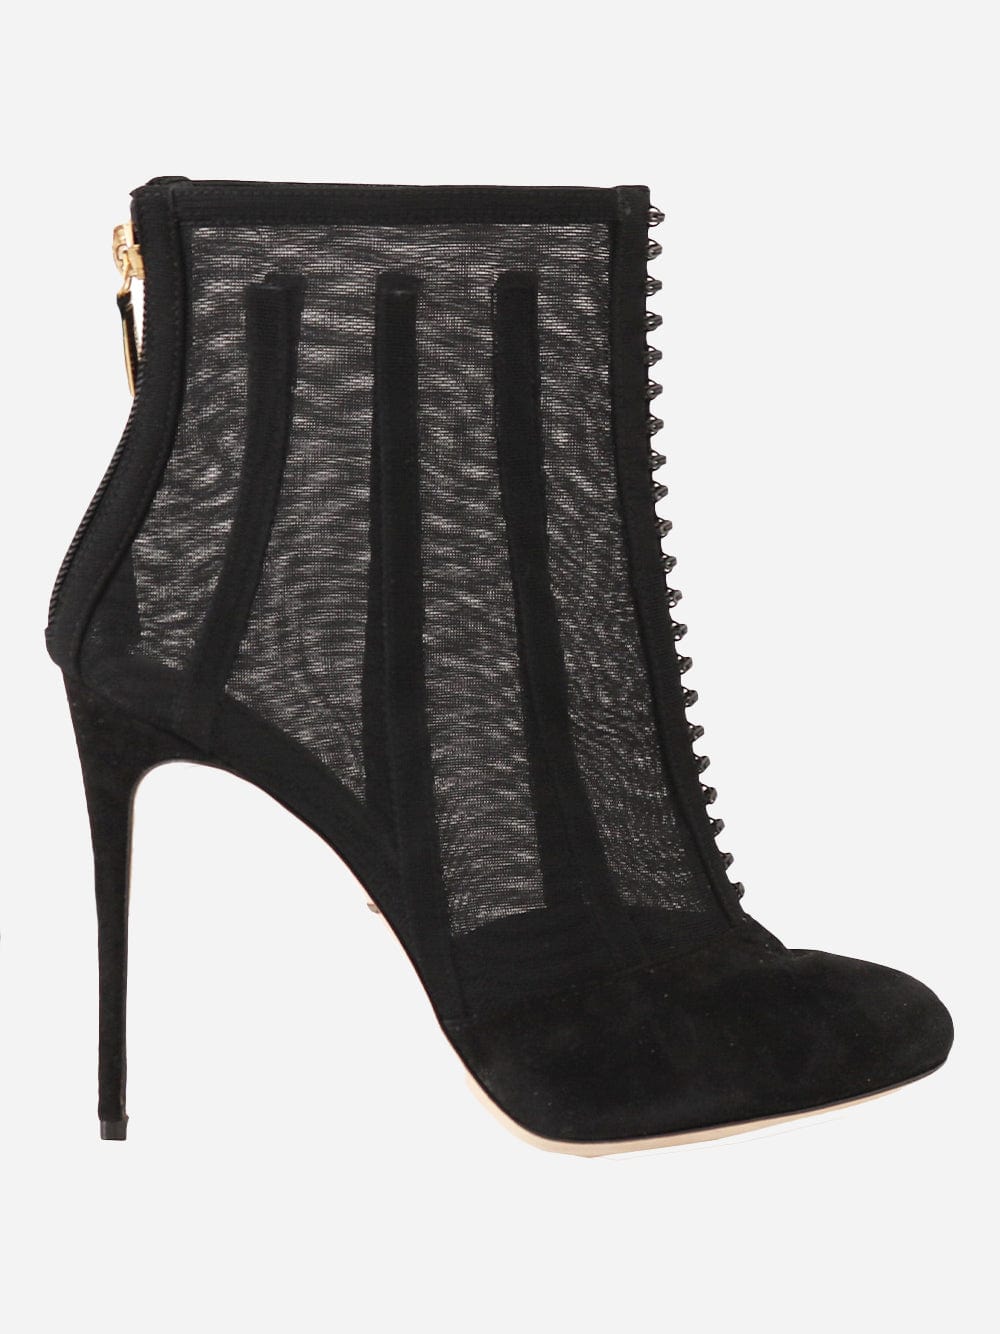 Dolce & Gabbana Mesh Tulle Ankle Boots